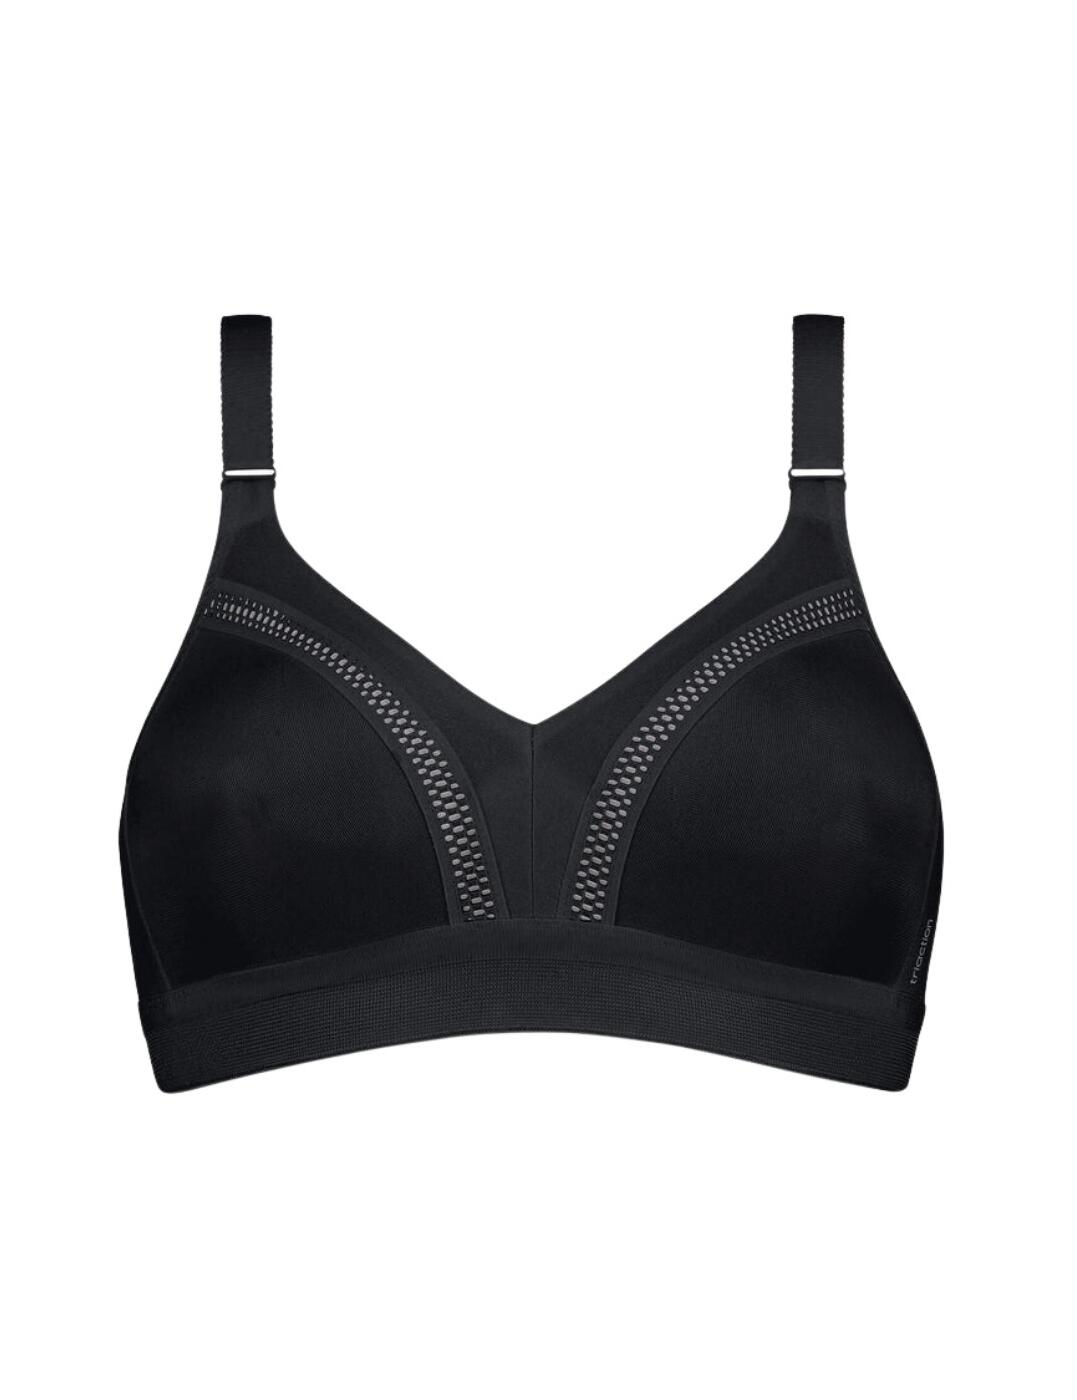 triaction by Triumph FITNESS NON-WIRED FRONT CLOSURE - High